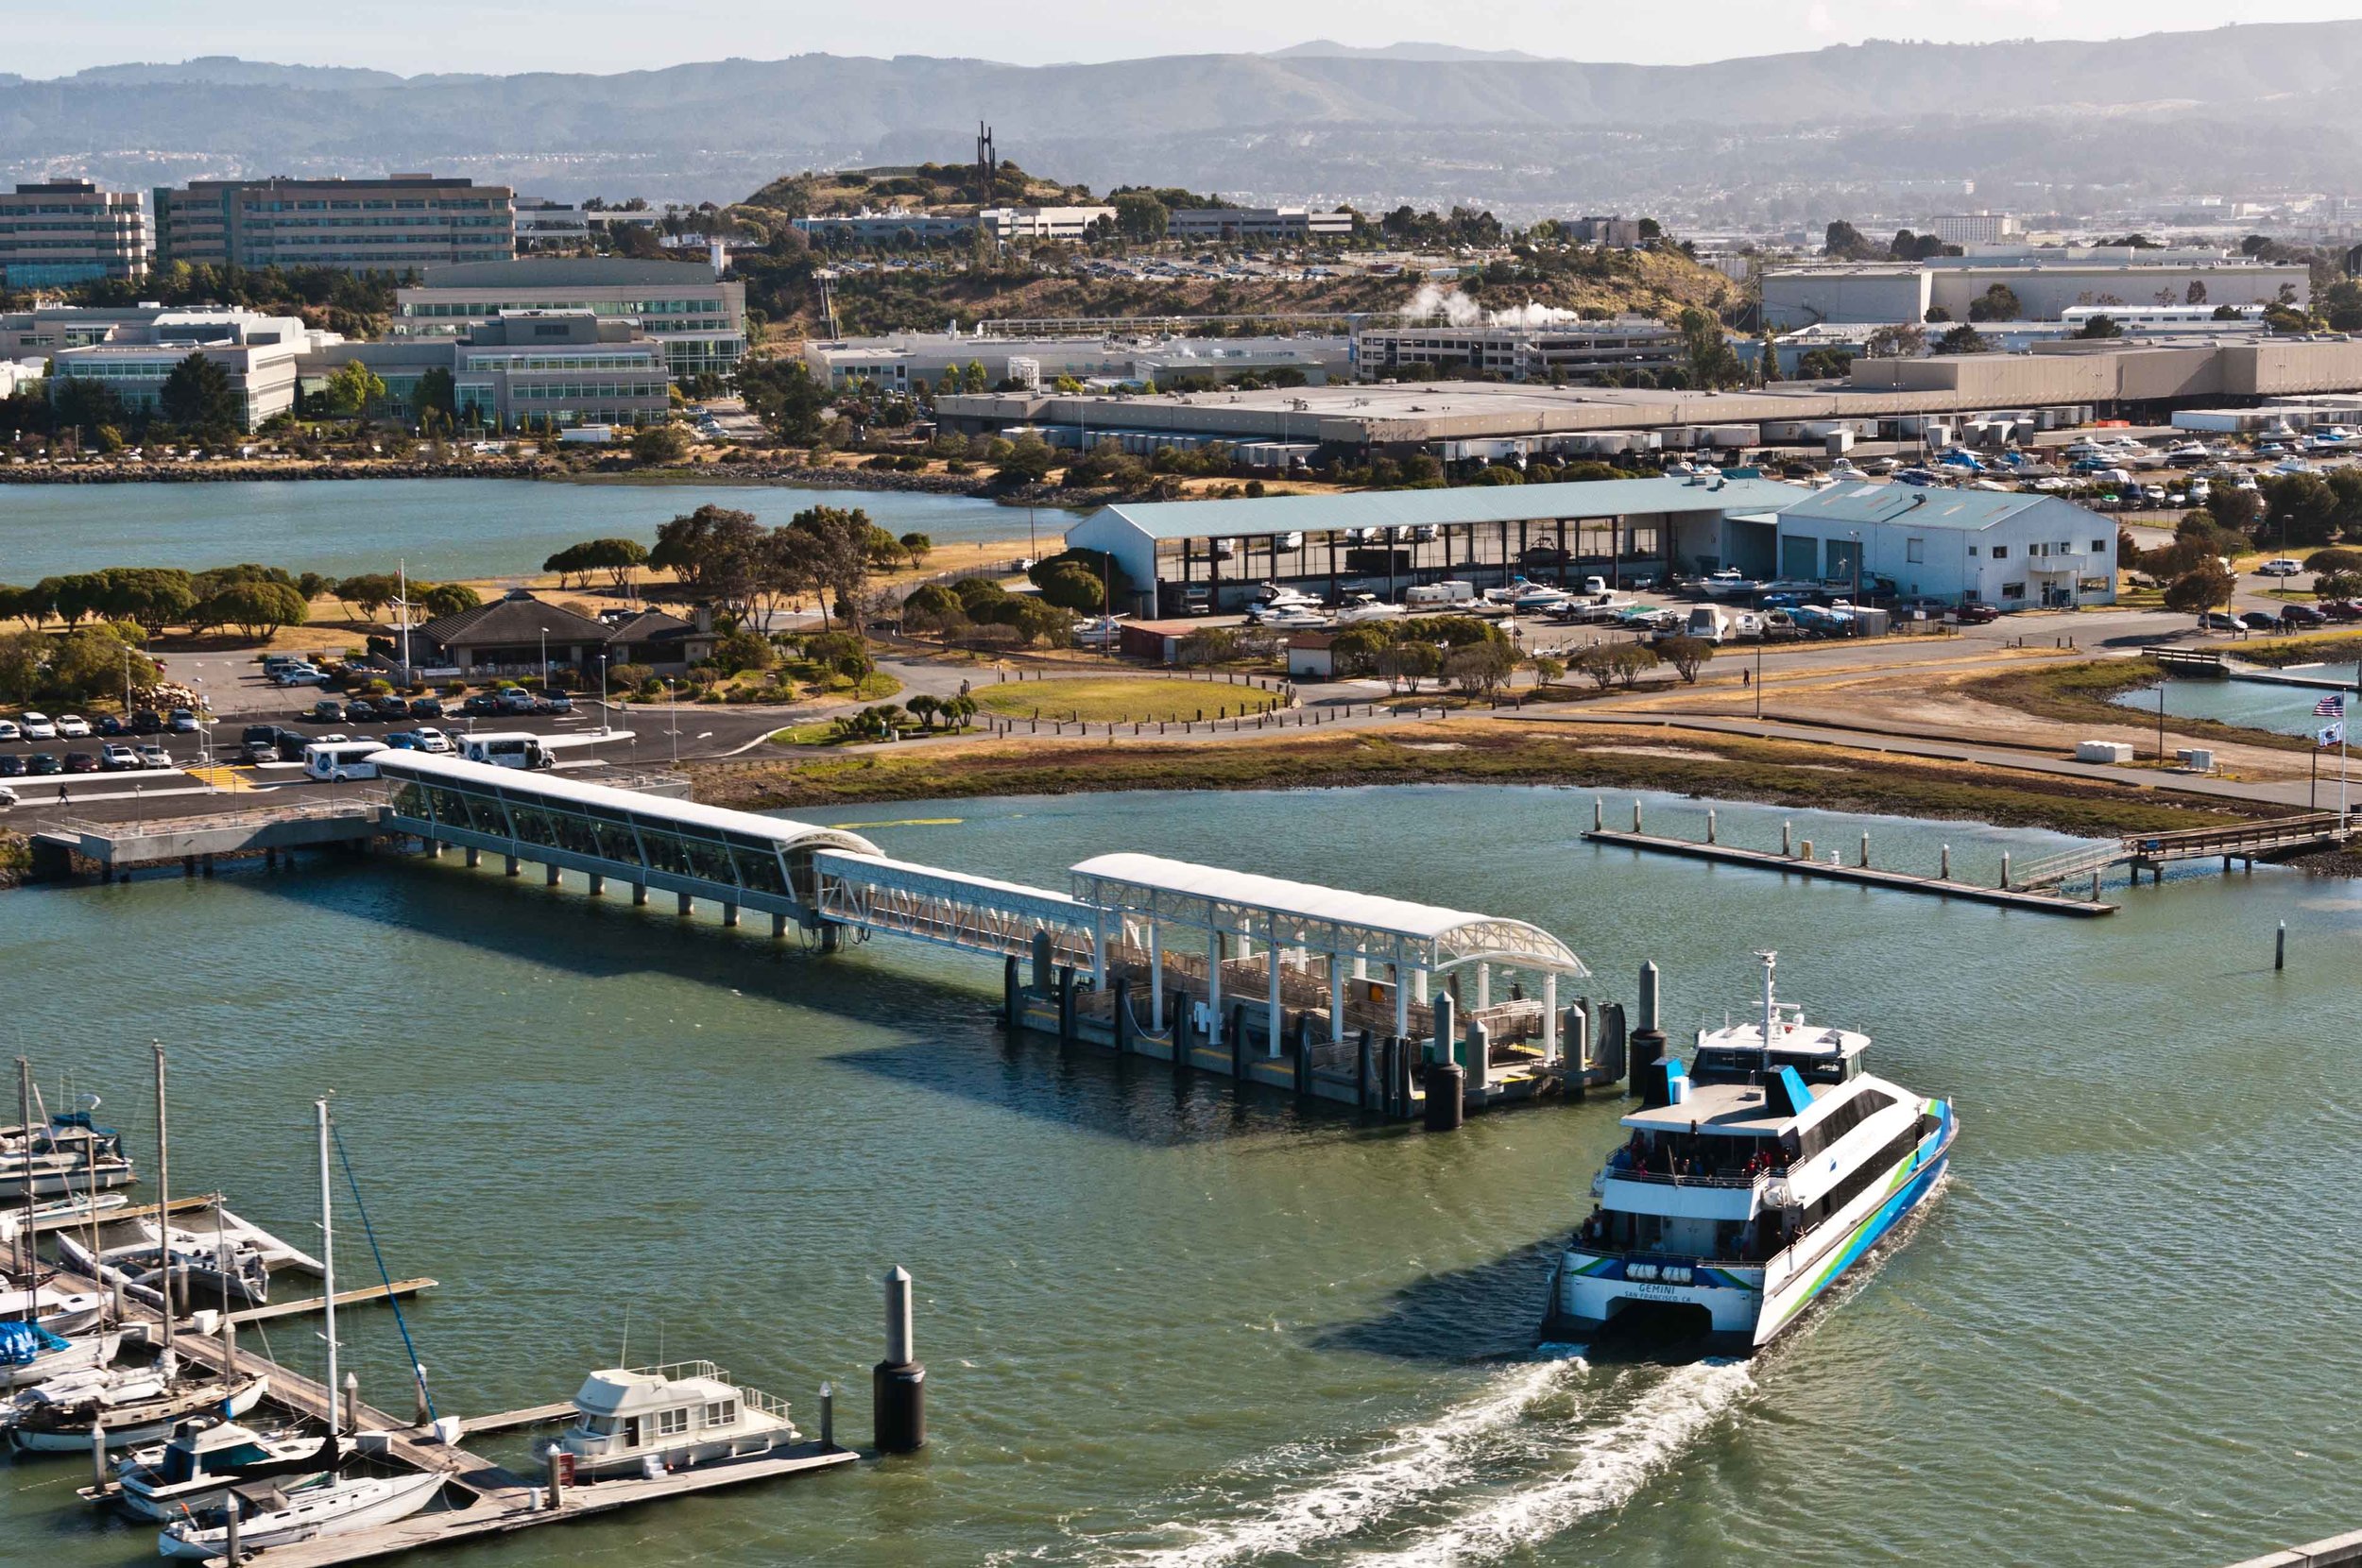 OYSTER POINT FERRY TERMINAL, SOUTH SAN FRANCISCO, CA